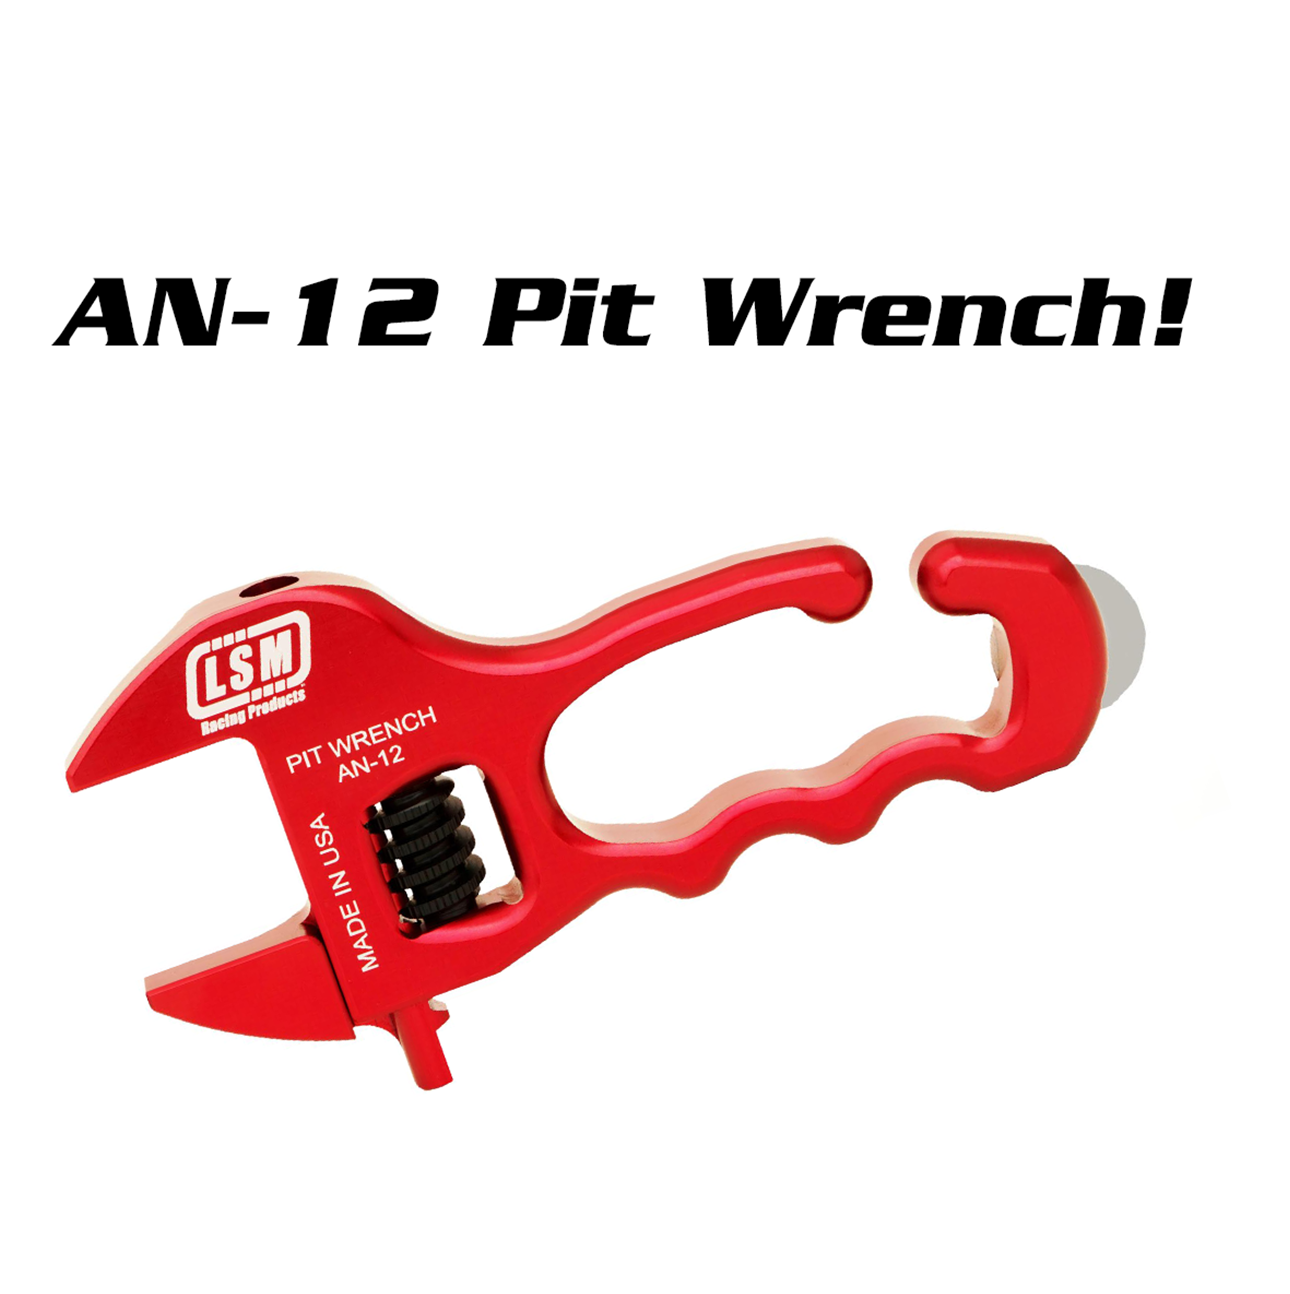 AN-12 Pit Wrench